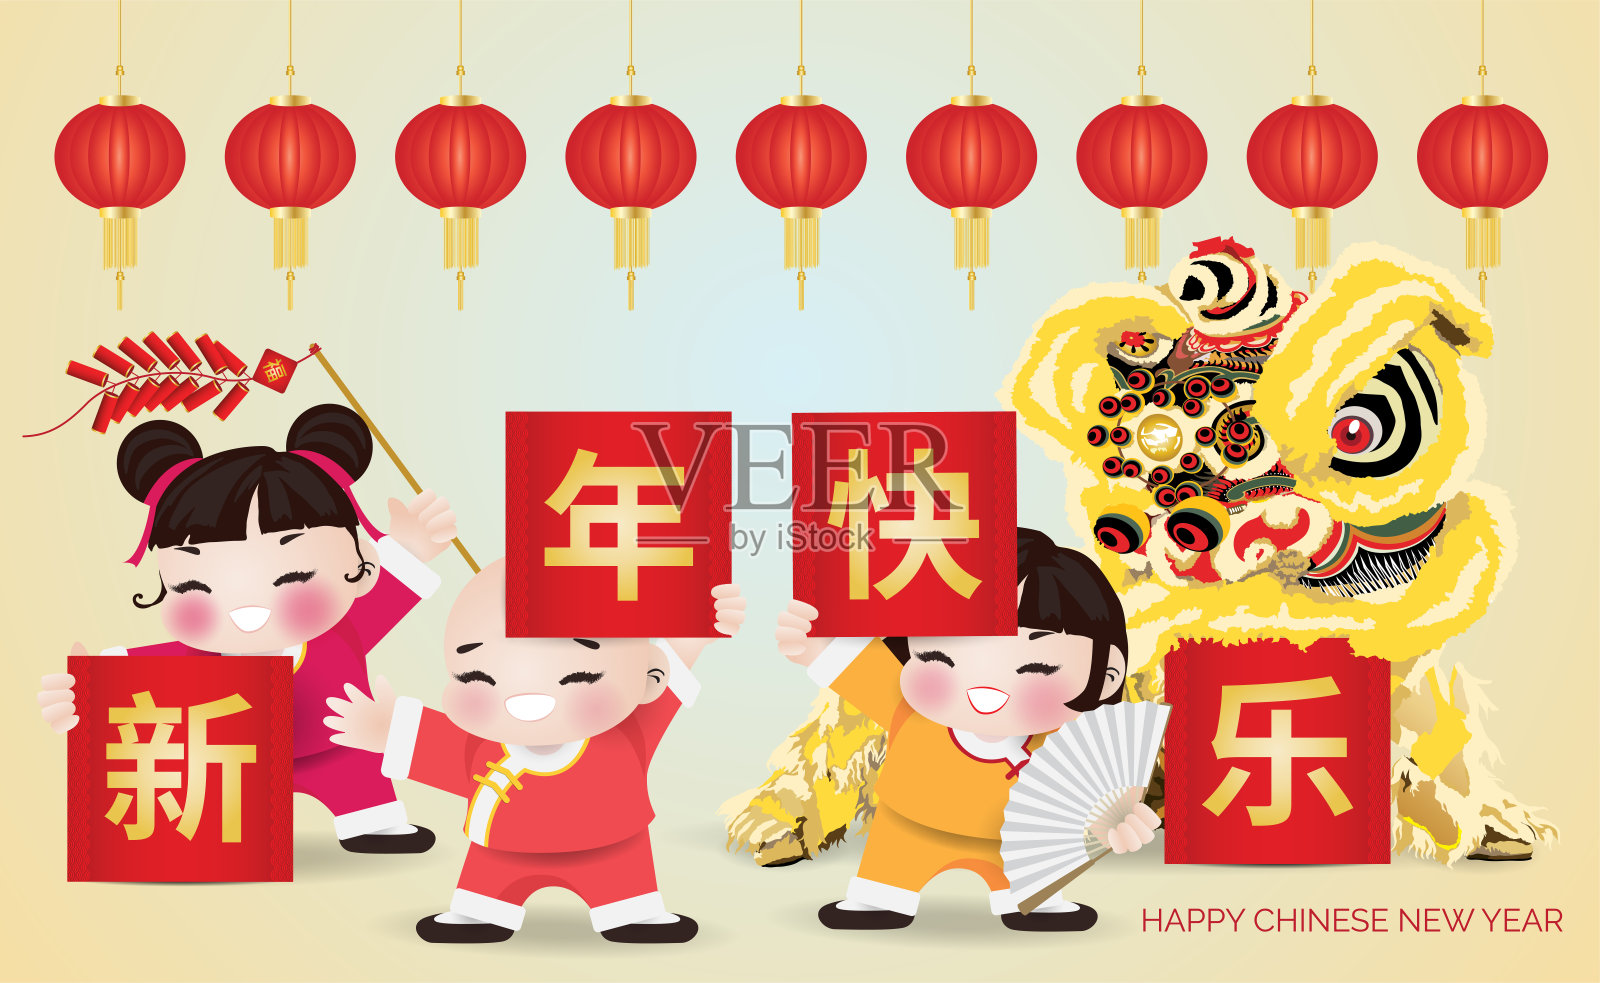 children and lion dancing blessing for Chinese new year设计模板素材